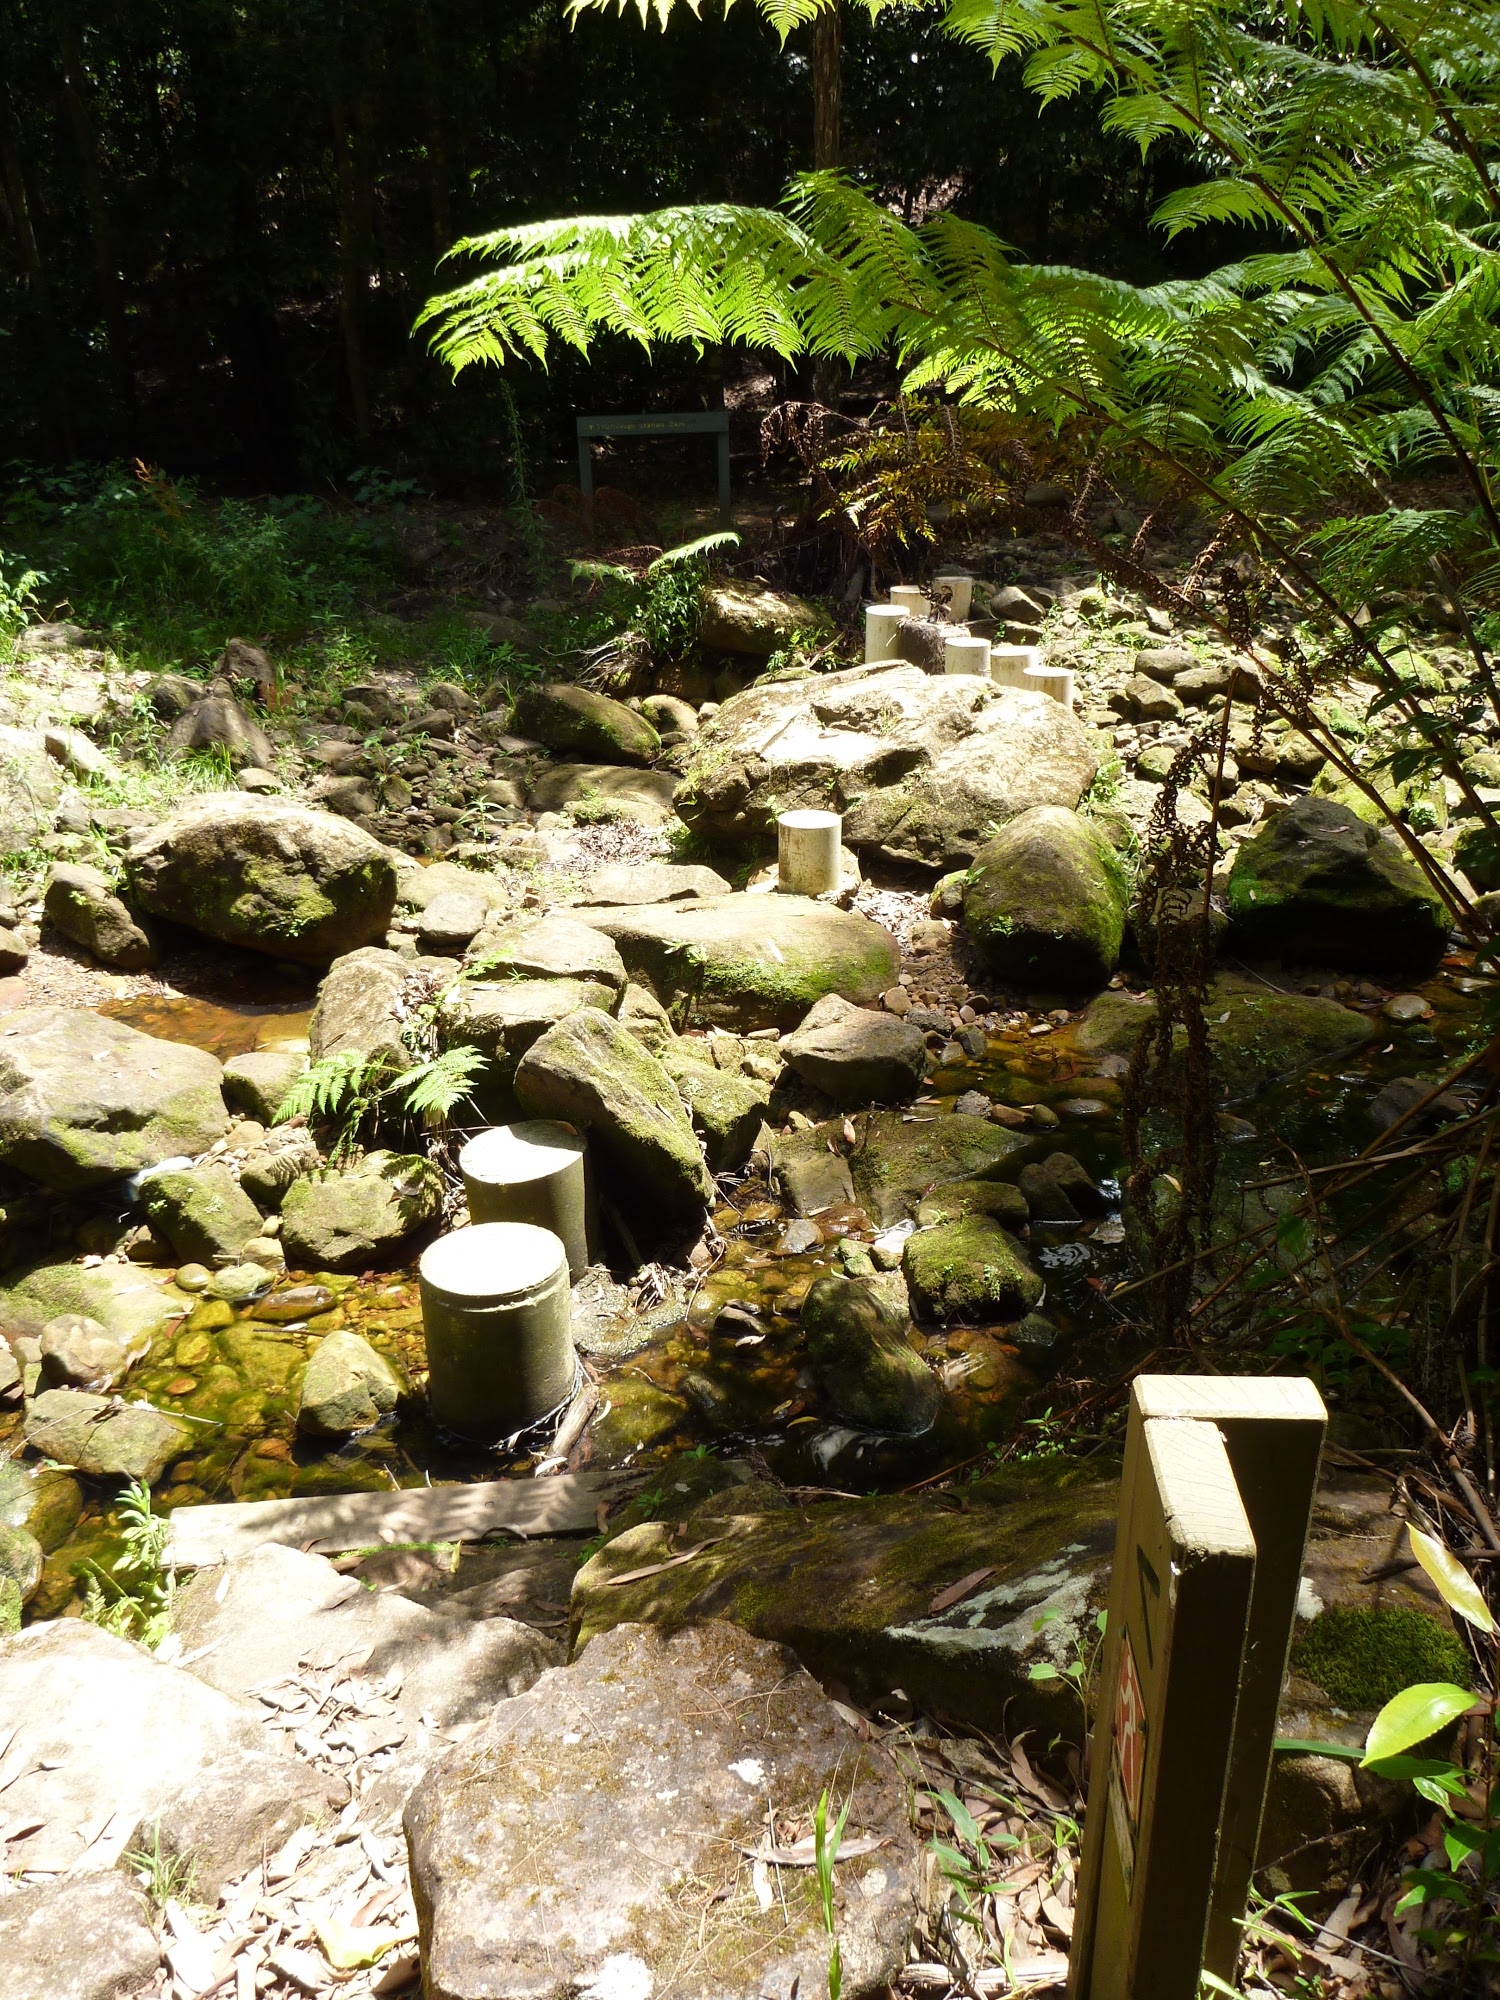 Stepping stones over the upper Lane Cove River